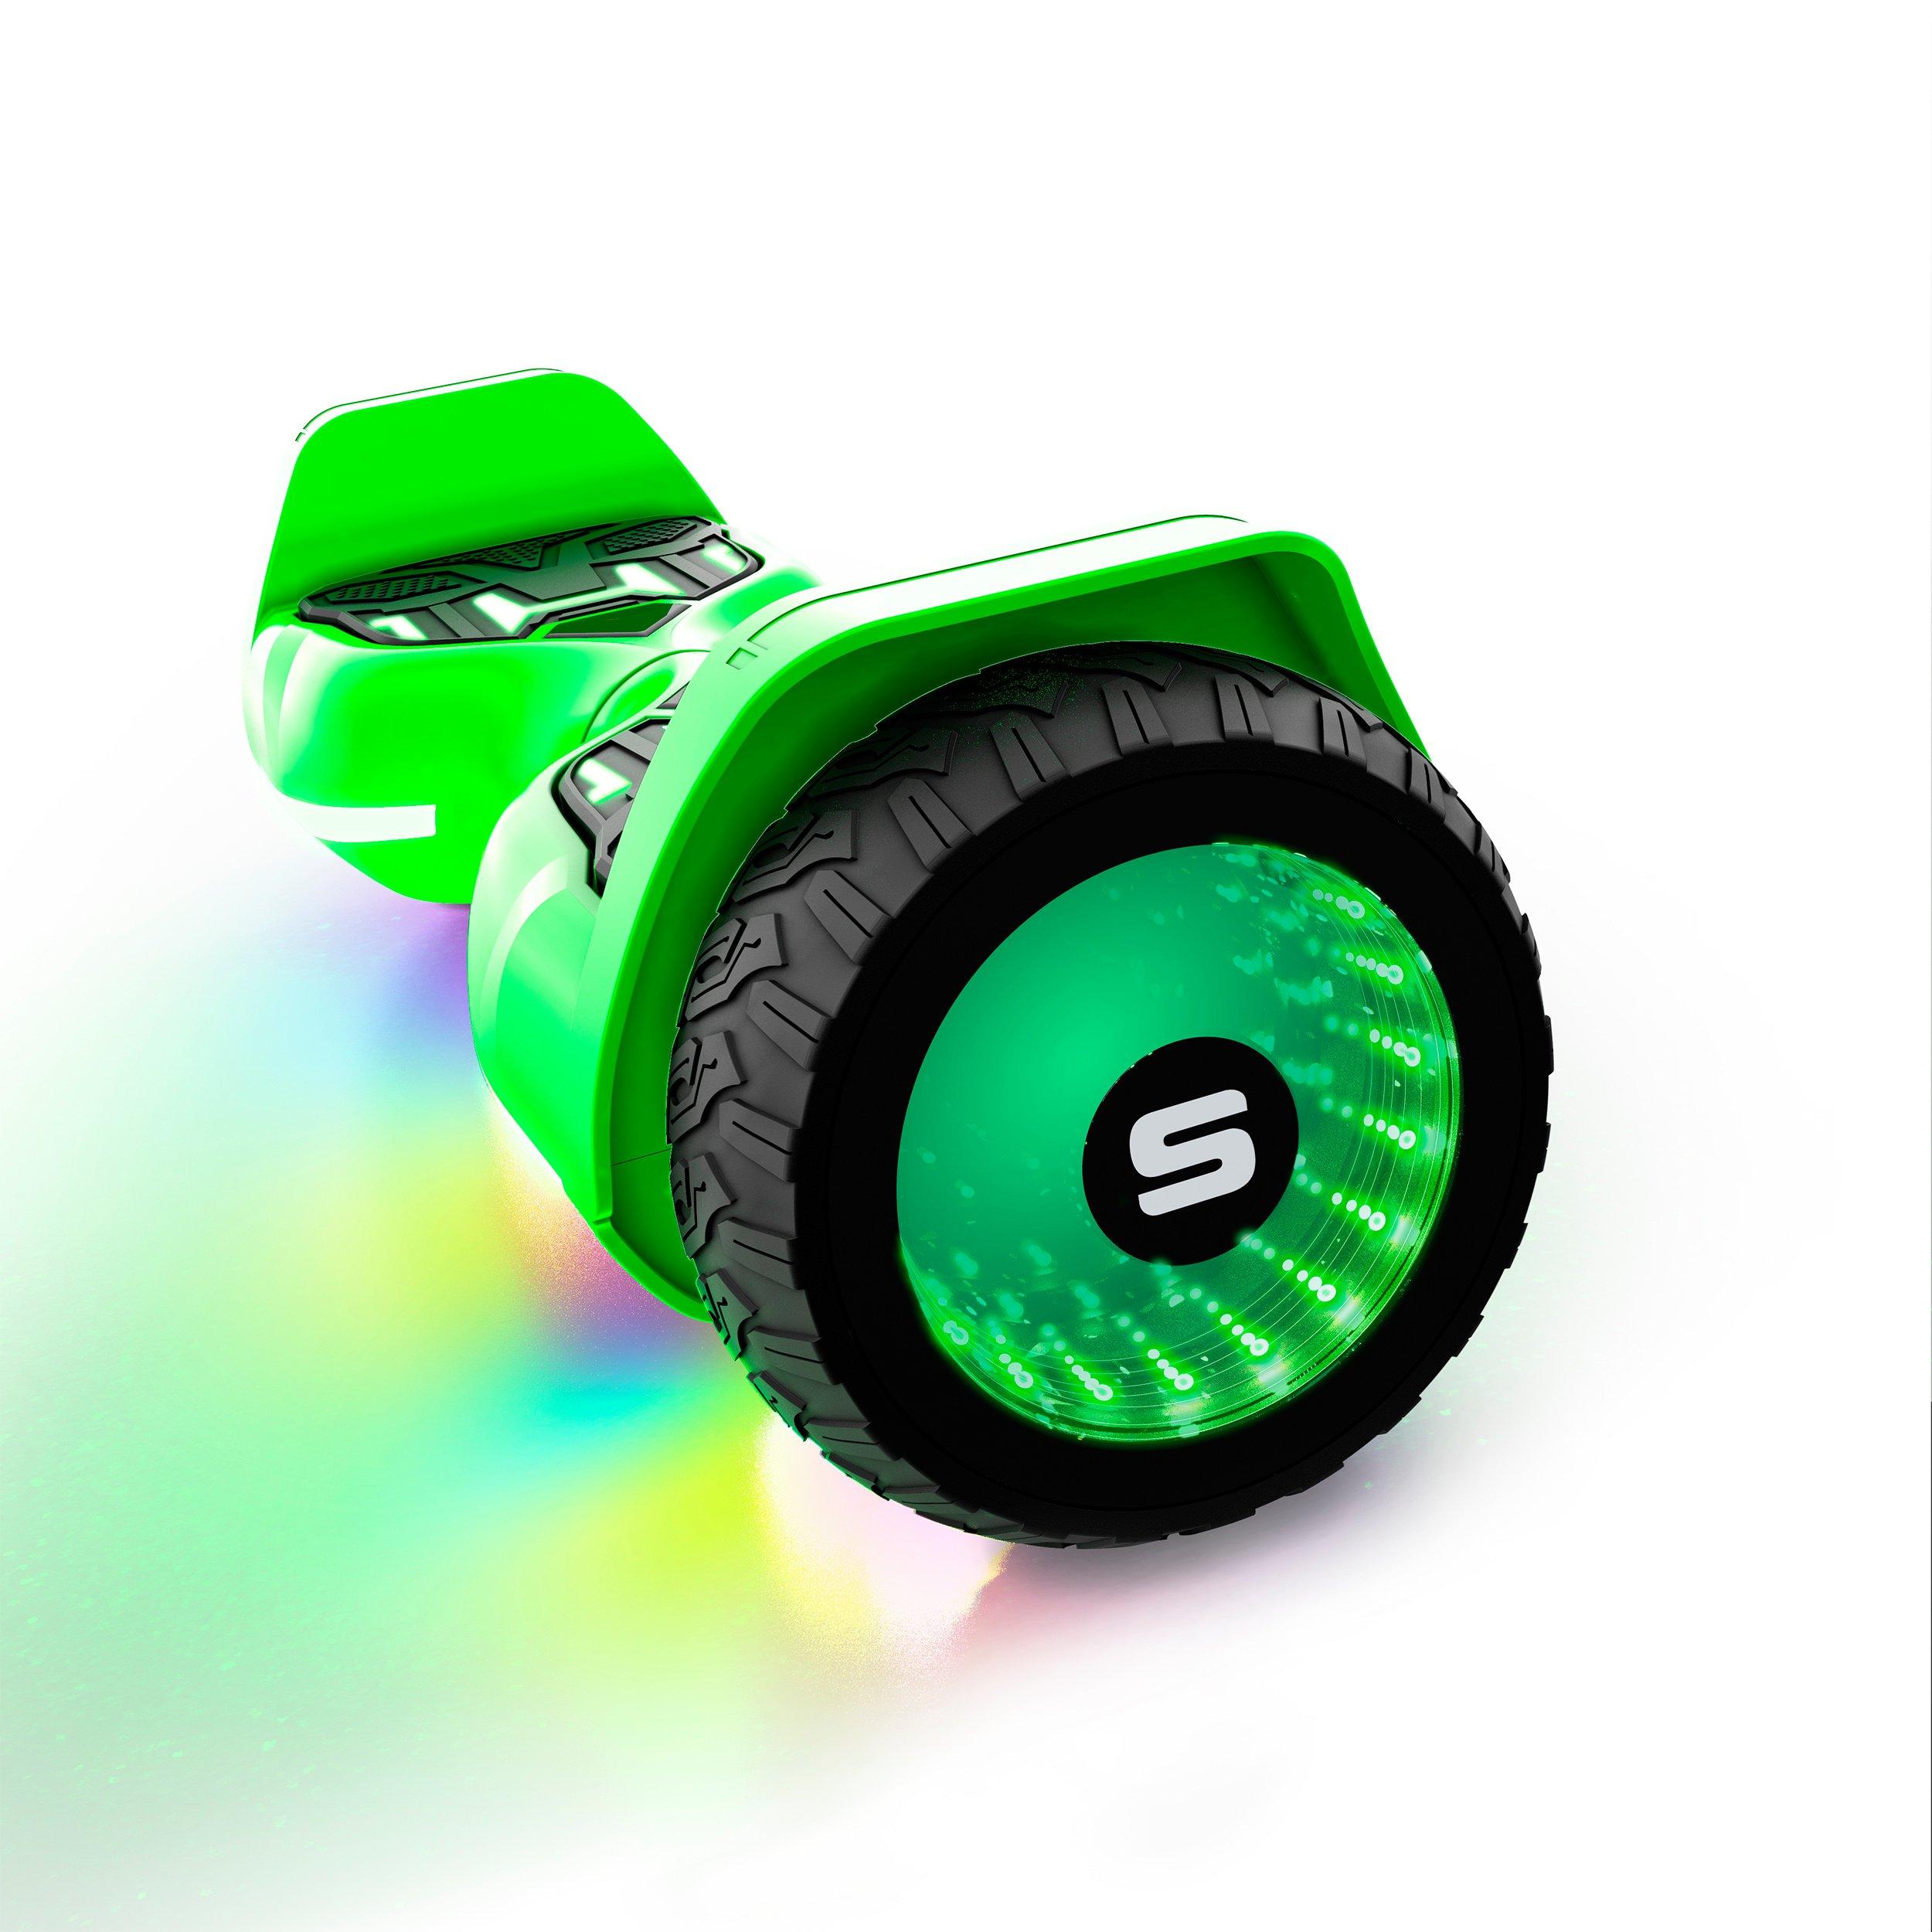 list item 2 of 9 swagBOARD Warrior T580 Hoverboard with MusicSynced Light-Up LED Wheels